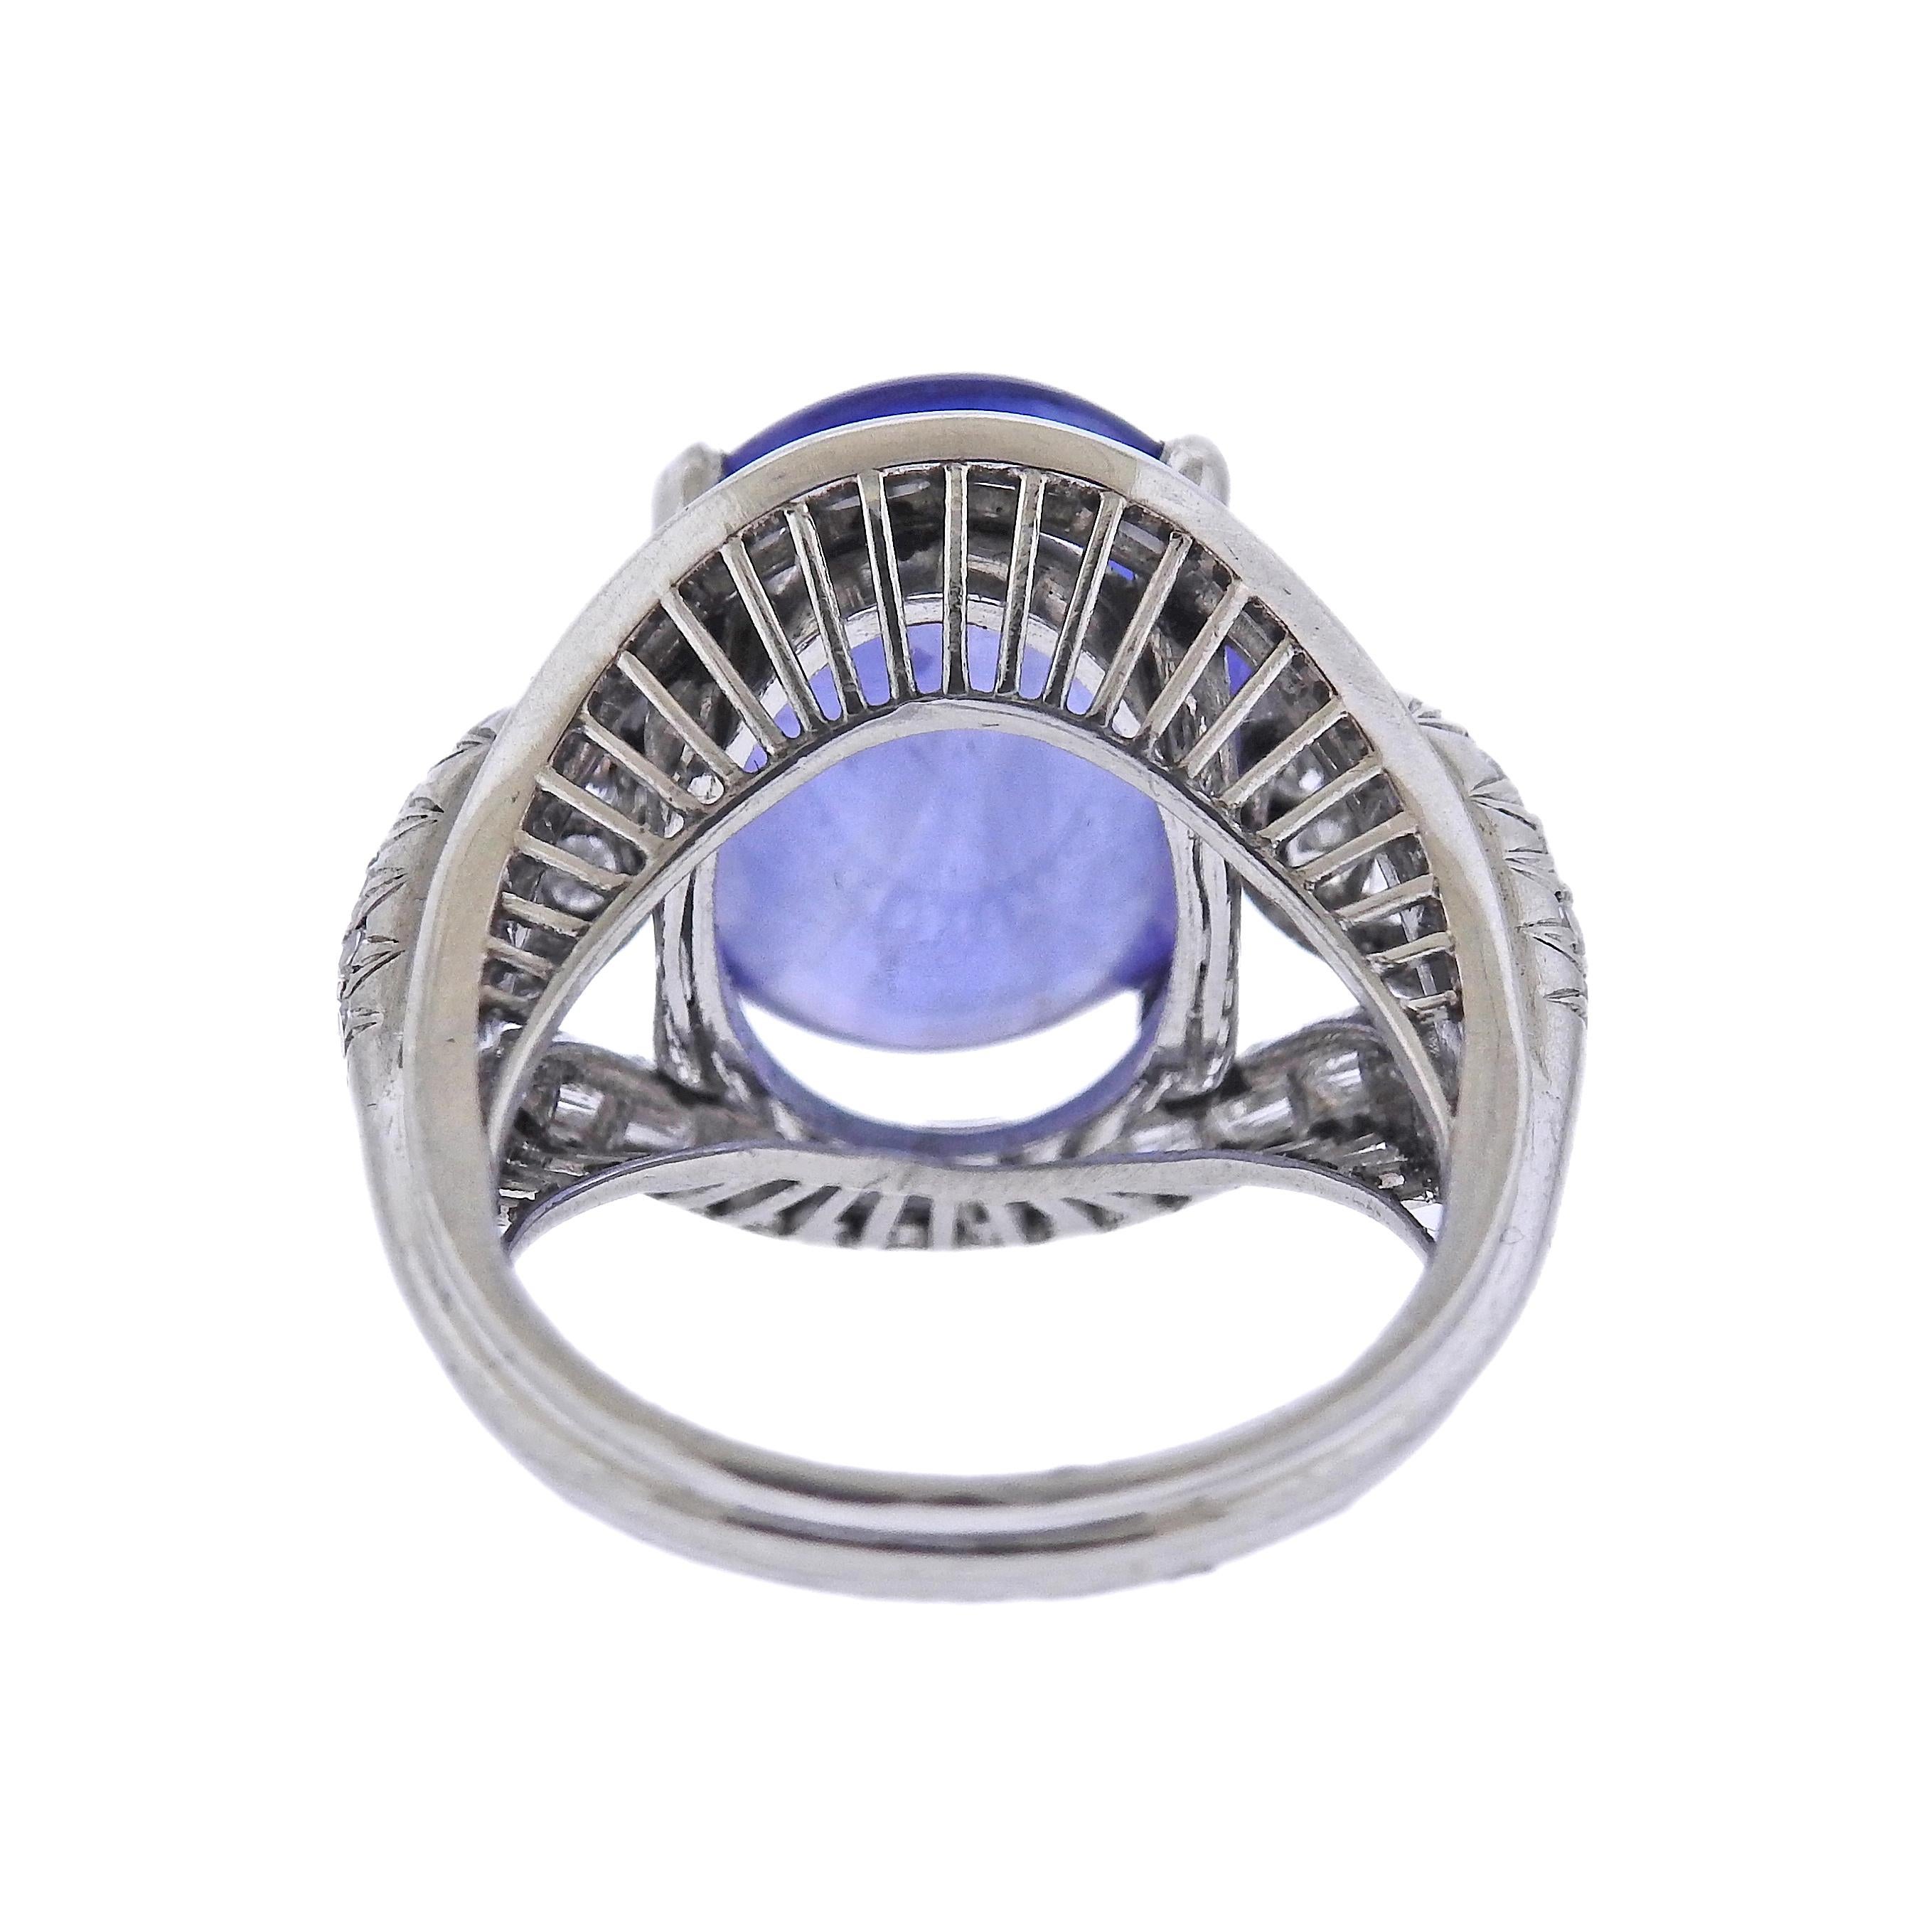 11.36 Carat Sapphire Cabochon Diamond Platinum Ring In Excellent Condition For Sale In New York, NY